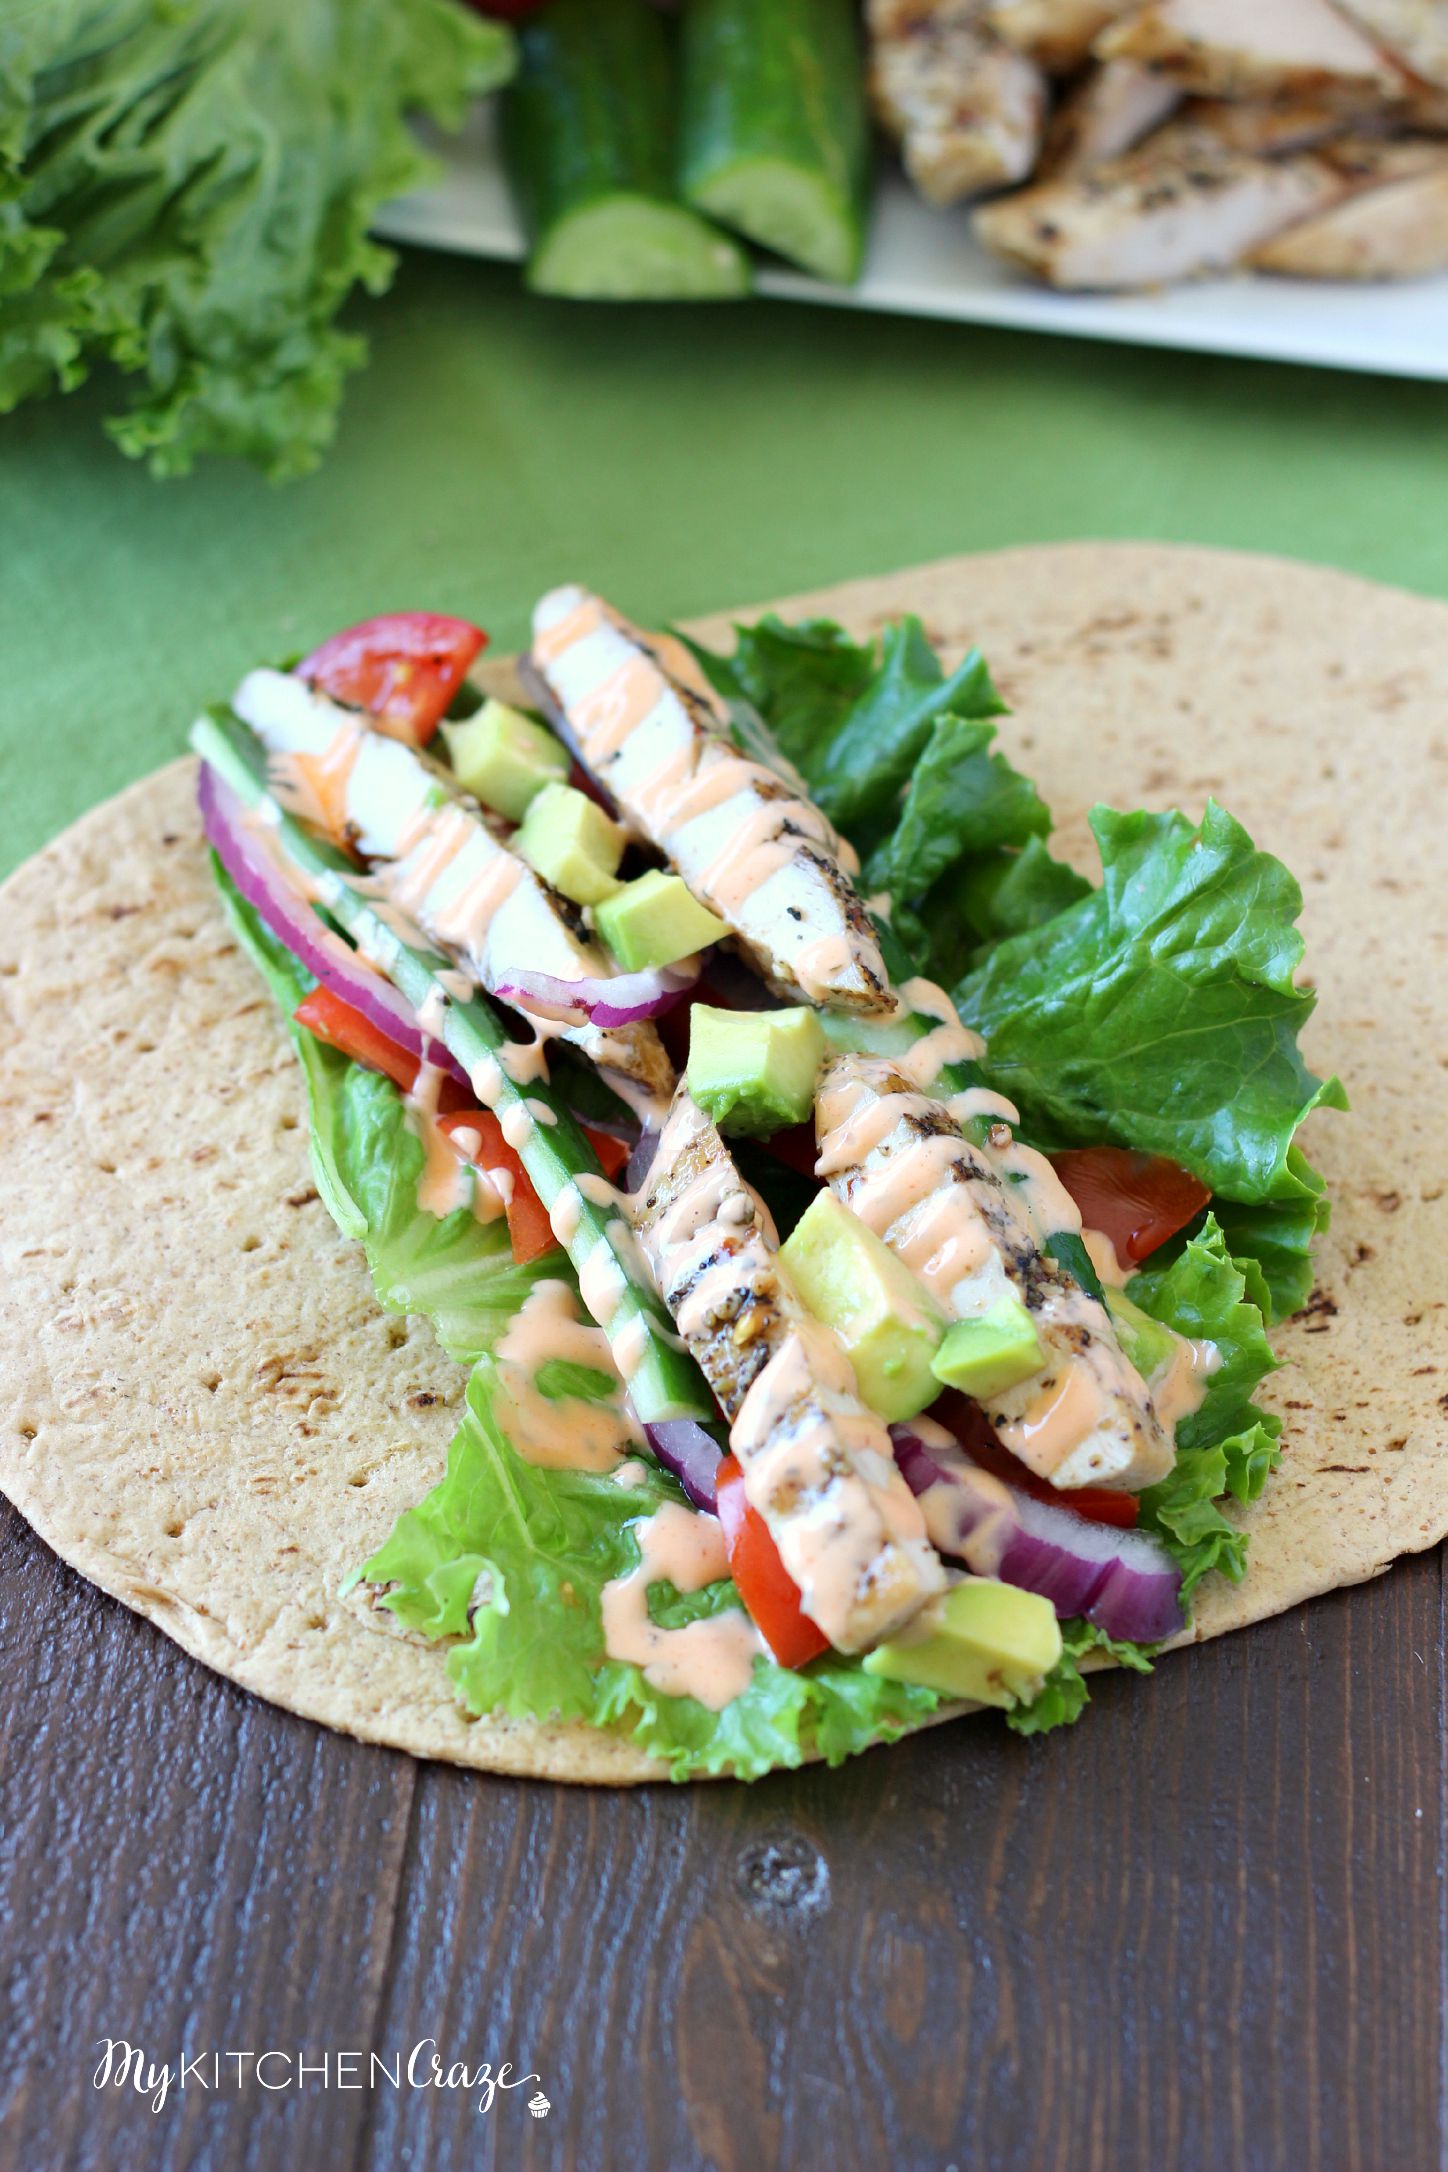 Buffalo Ranch Chicken Wrap ~ mykitchencraze.com ~ Grilled chicken smothered in buffalo ranch sauce, then added with your favorite vegetables and a wrap. Healthy, quick and delicious!